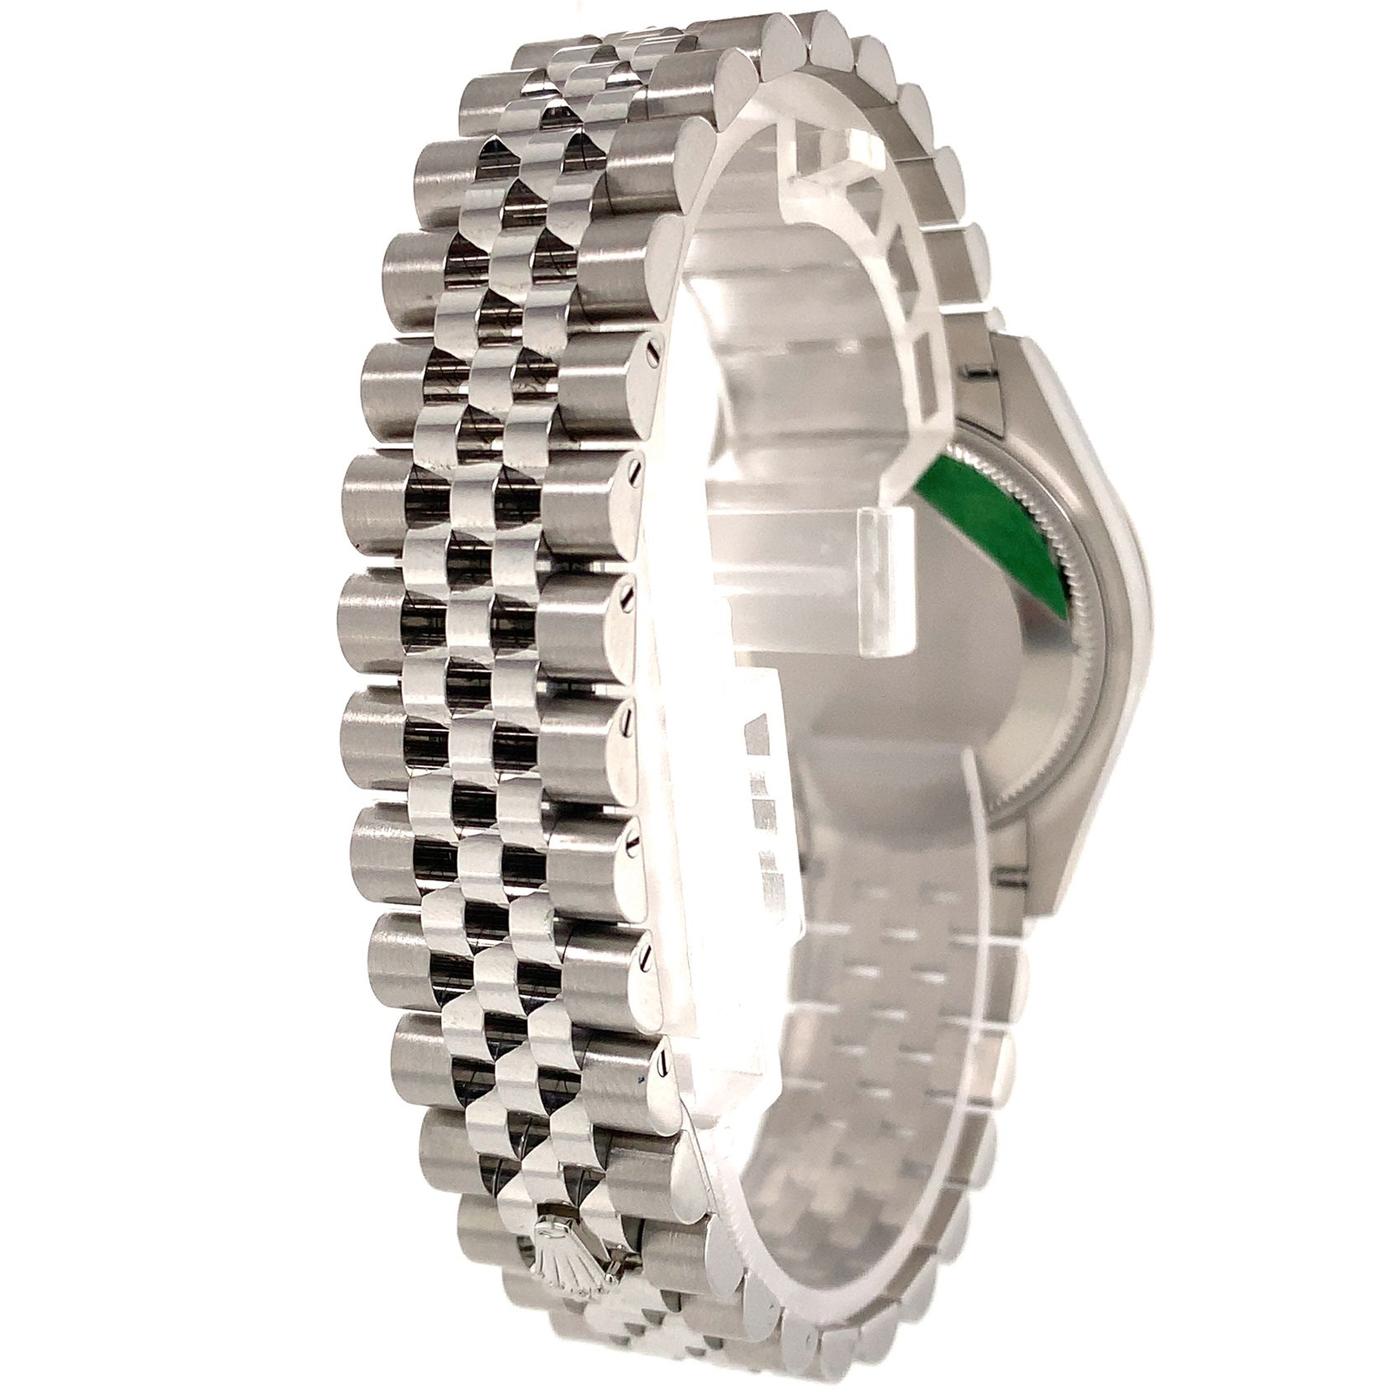 datejust green face